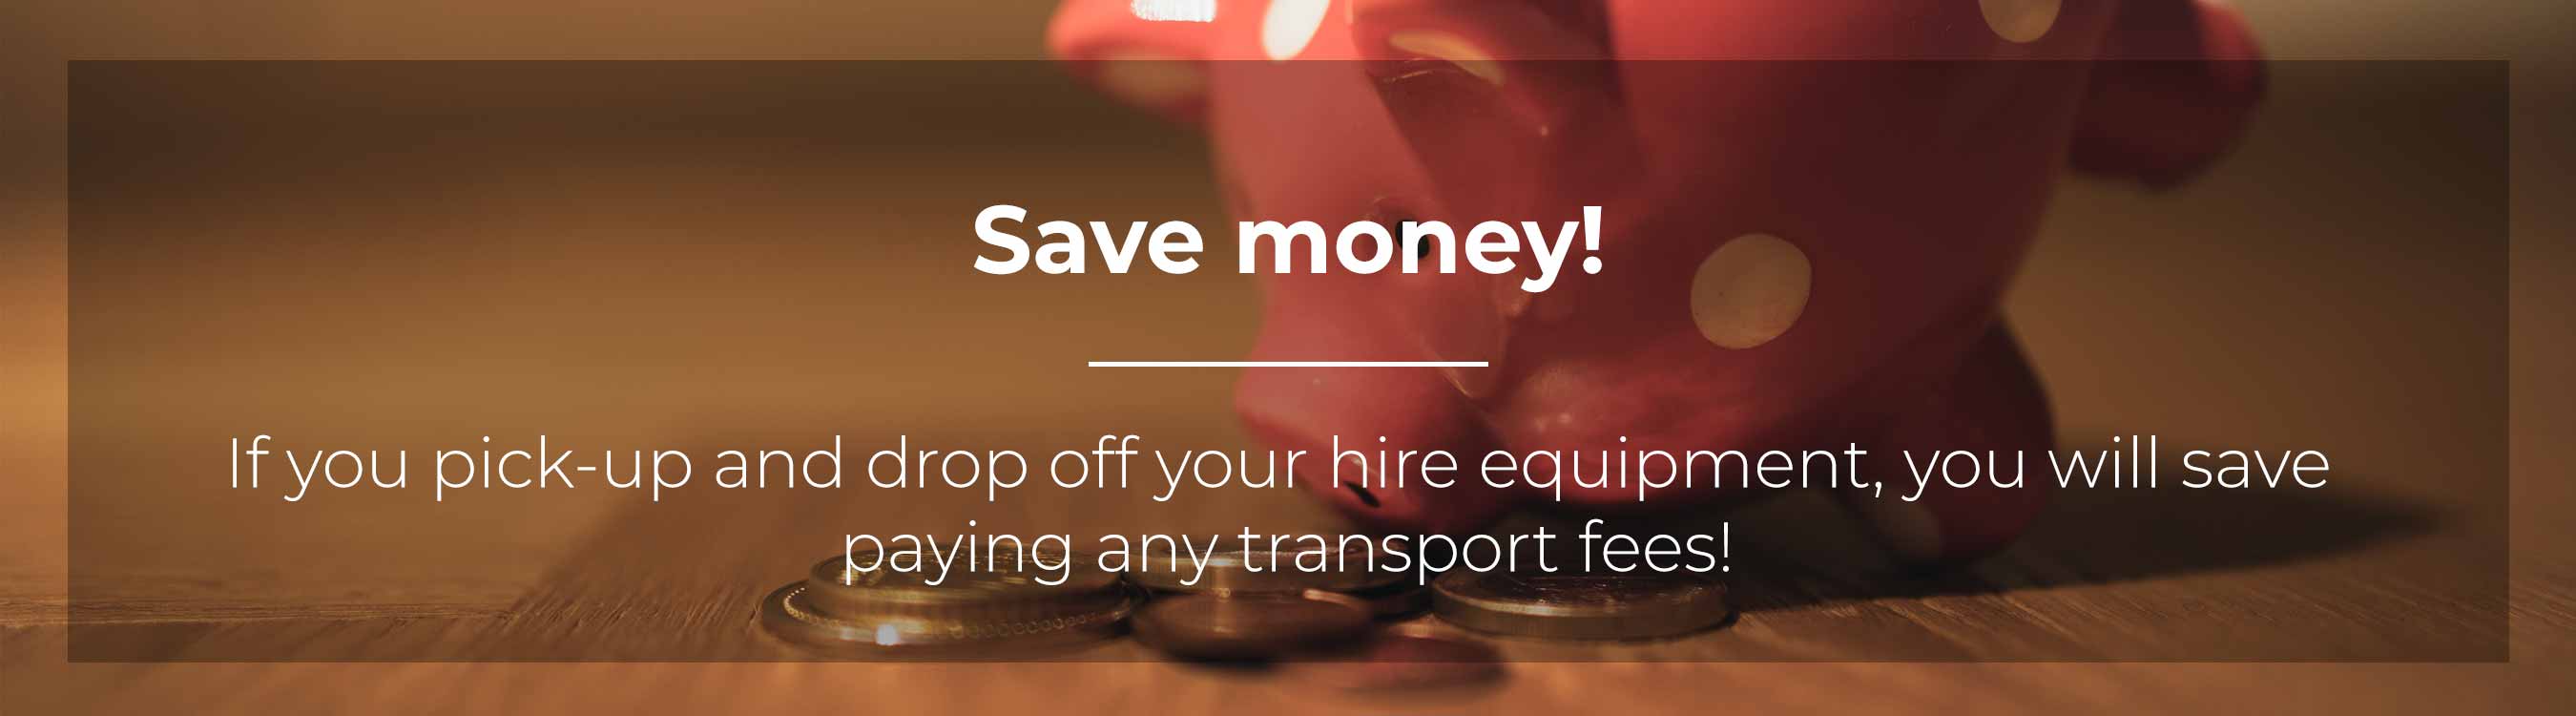 Save money when you self-collect and return event equipment hire